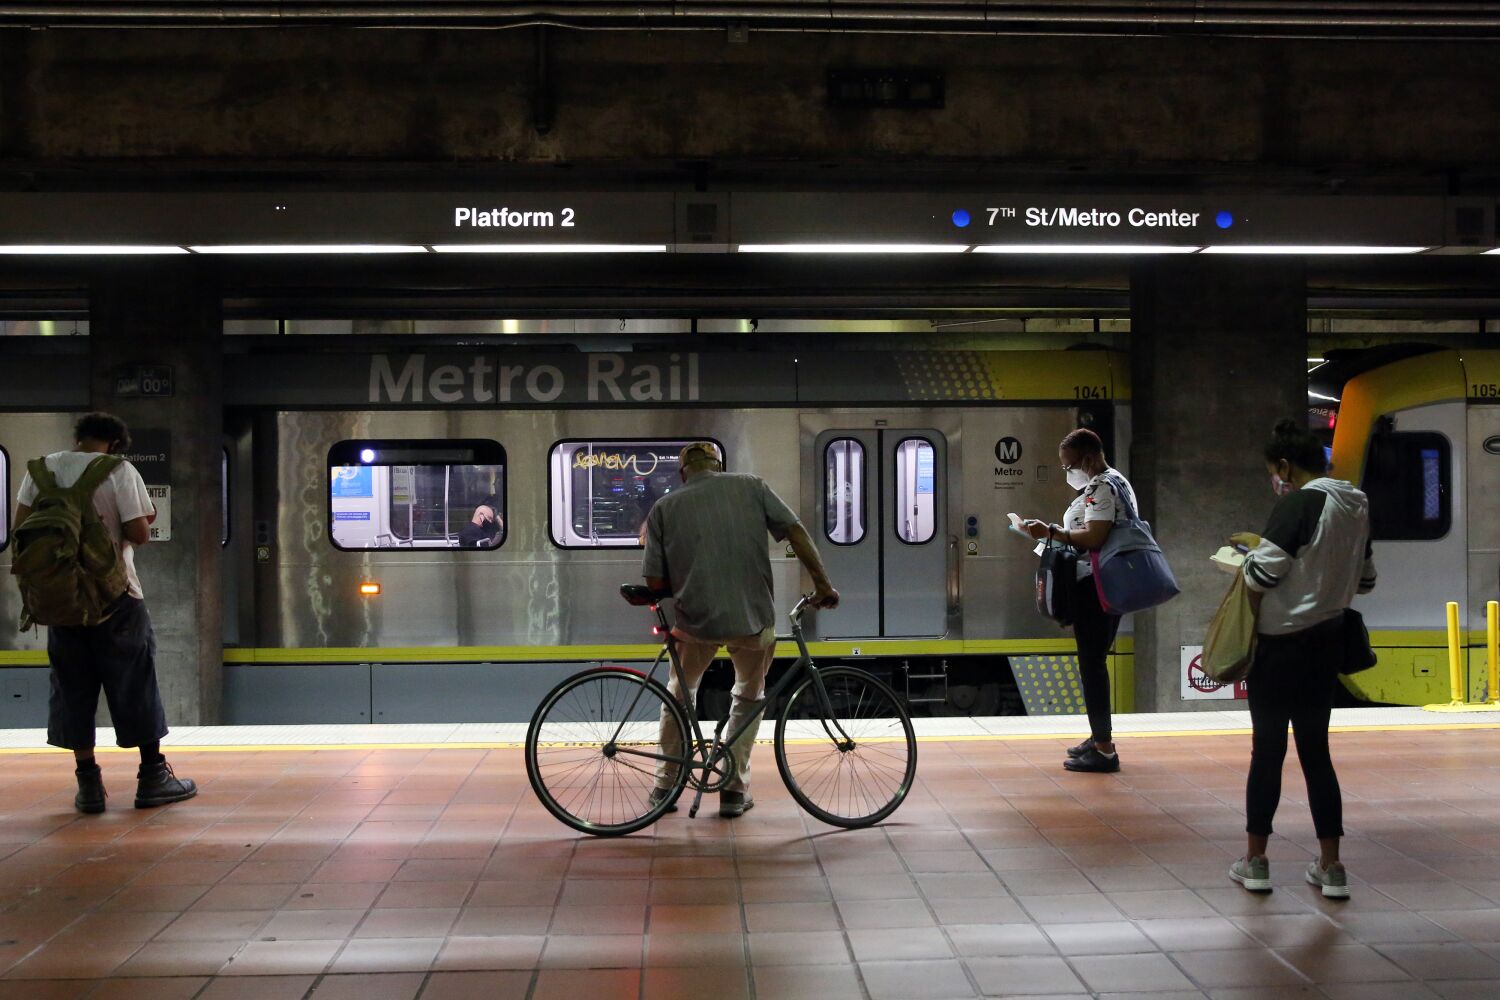 Teenage boy dies after being stabbed, shot near downtown L.A. Metro station